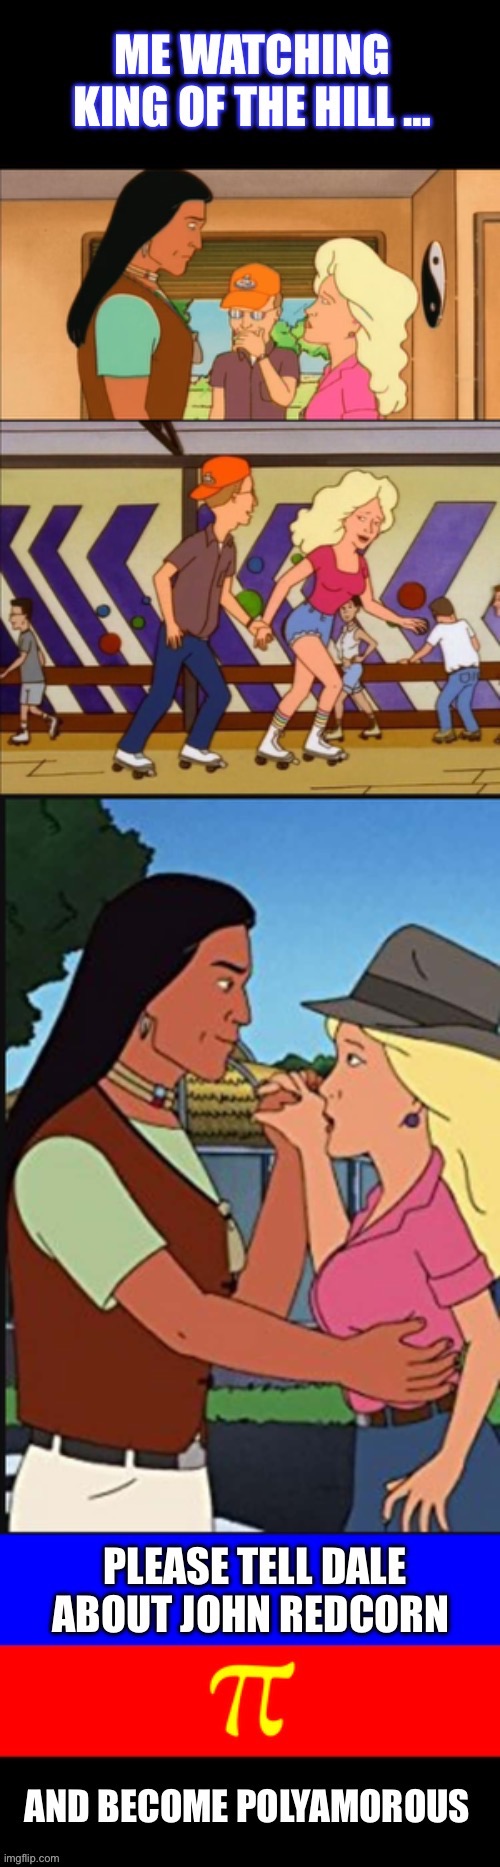 Me watching king of the hill… | image tagged in polyamory,lgbtq,king of the hill,dale gribble,nancy hicks gribble,john redcorn | made w/ Imgflip meme maker